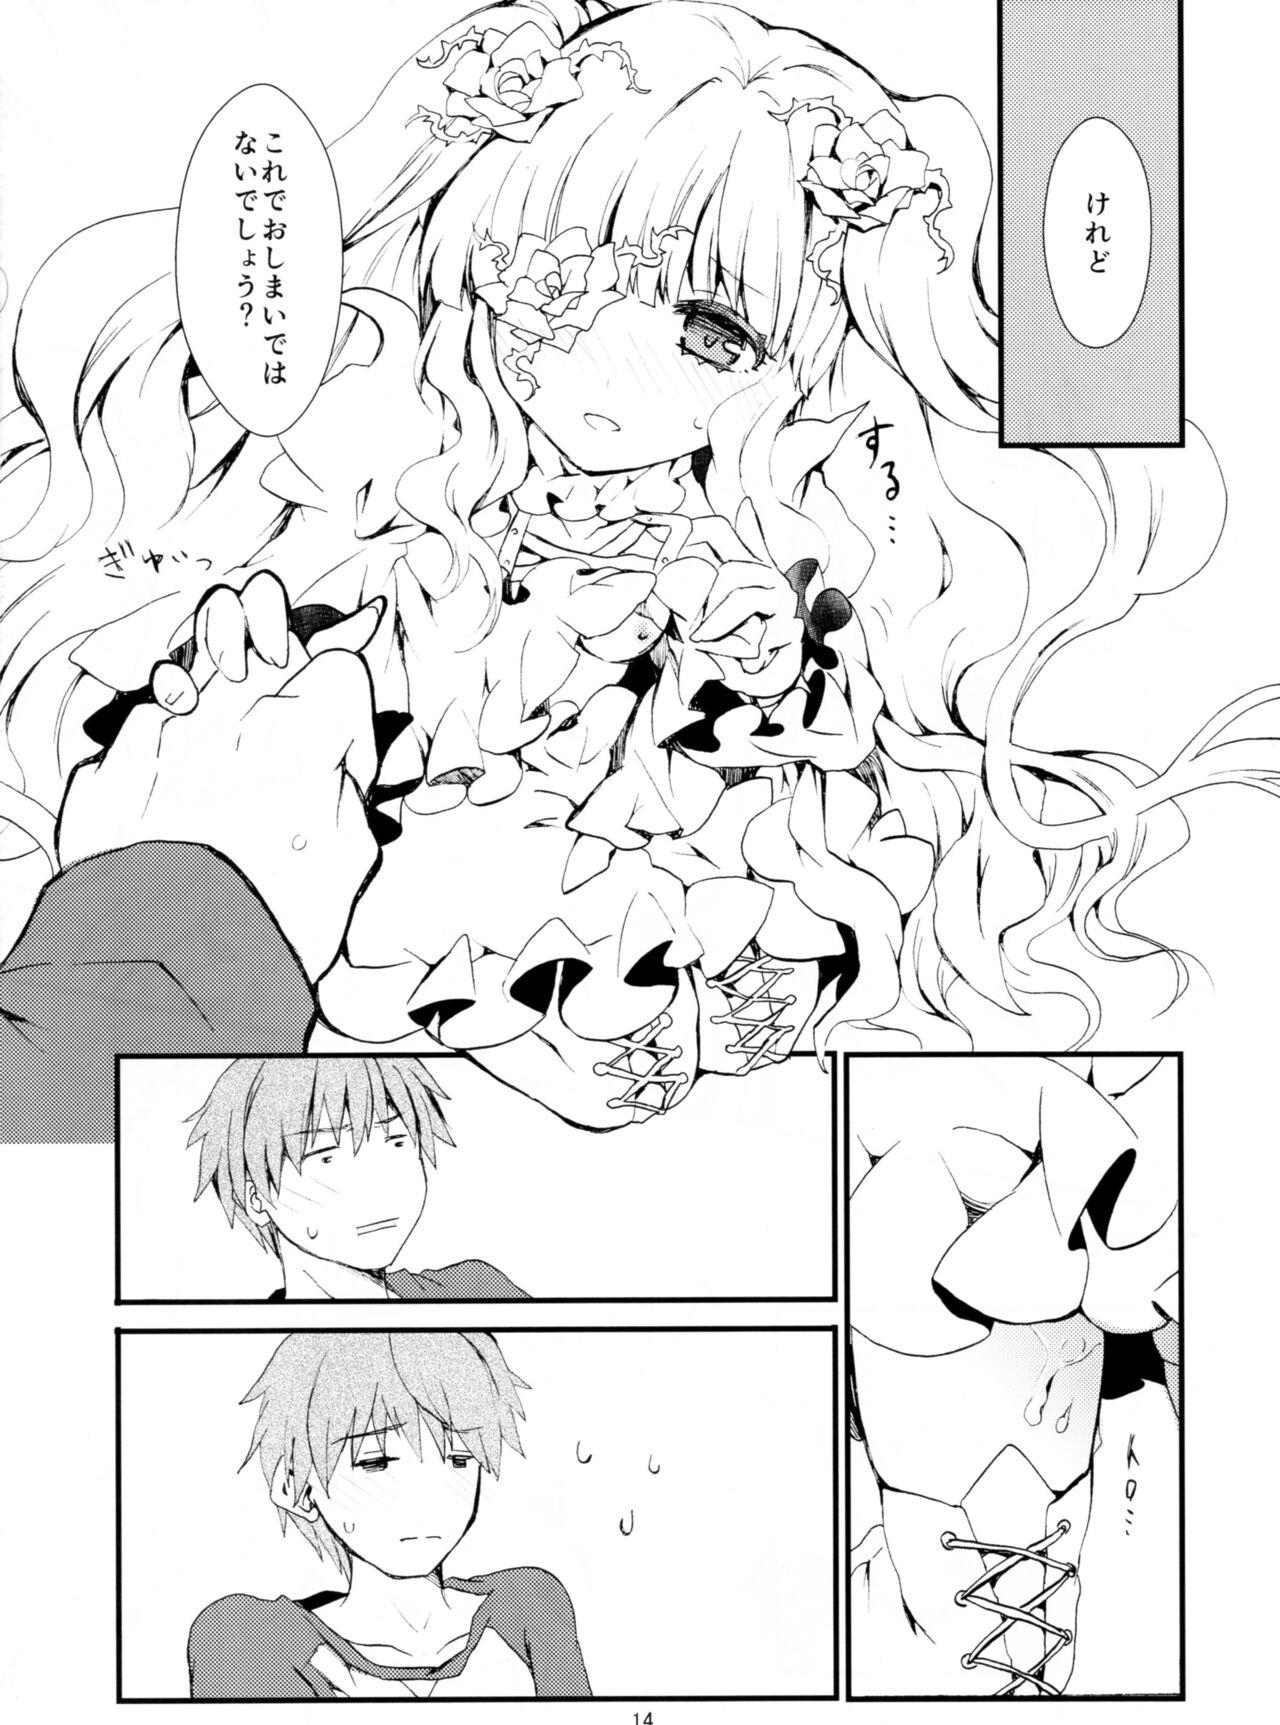 Gay Group Eat me, Drink me - Rozen maiden Fantasy - Page 11